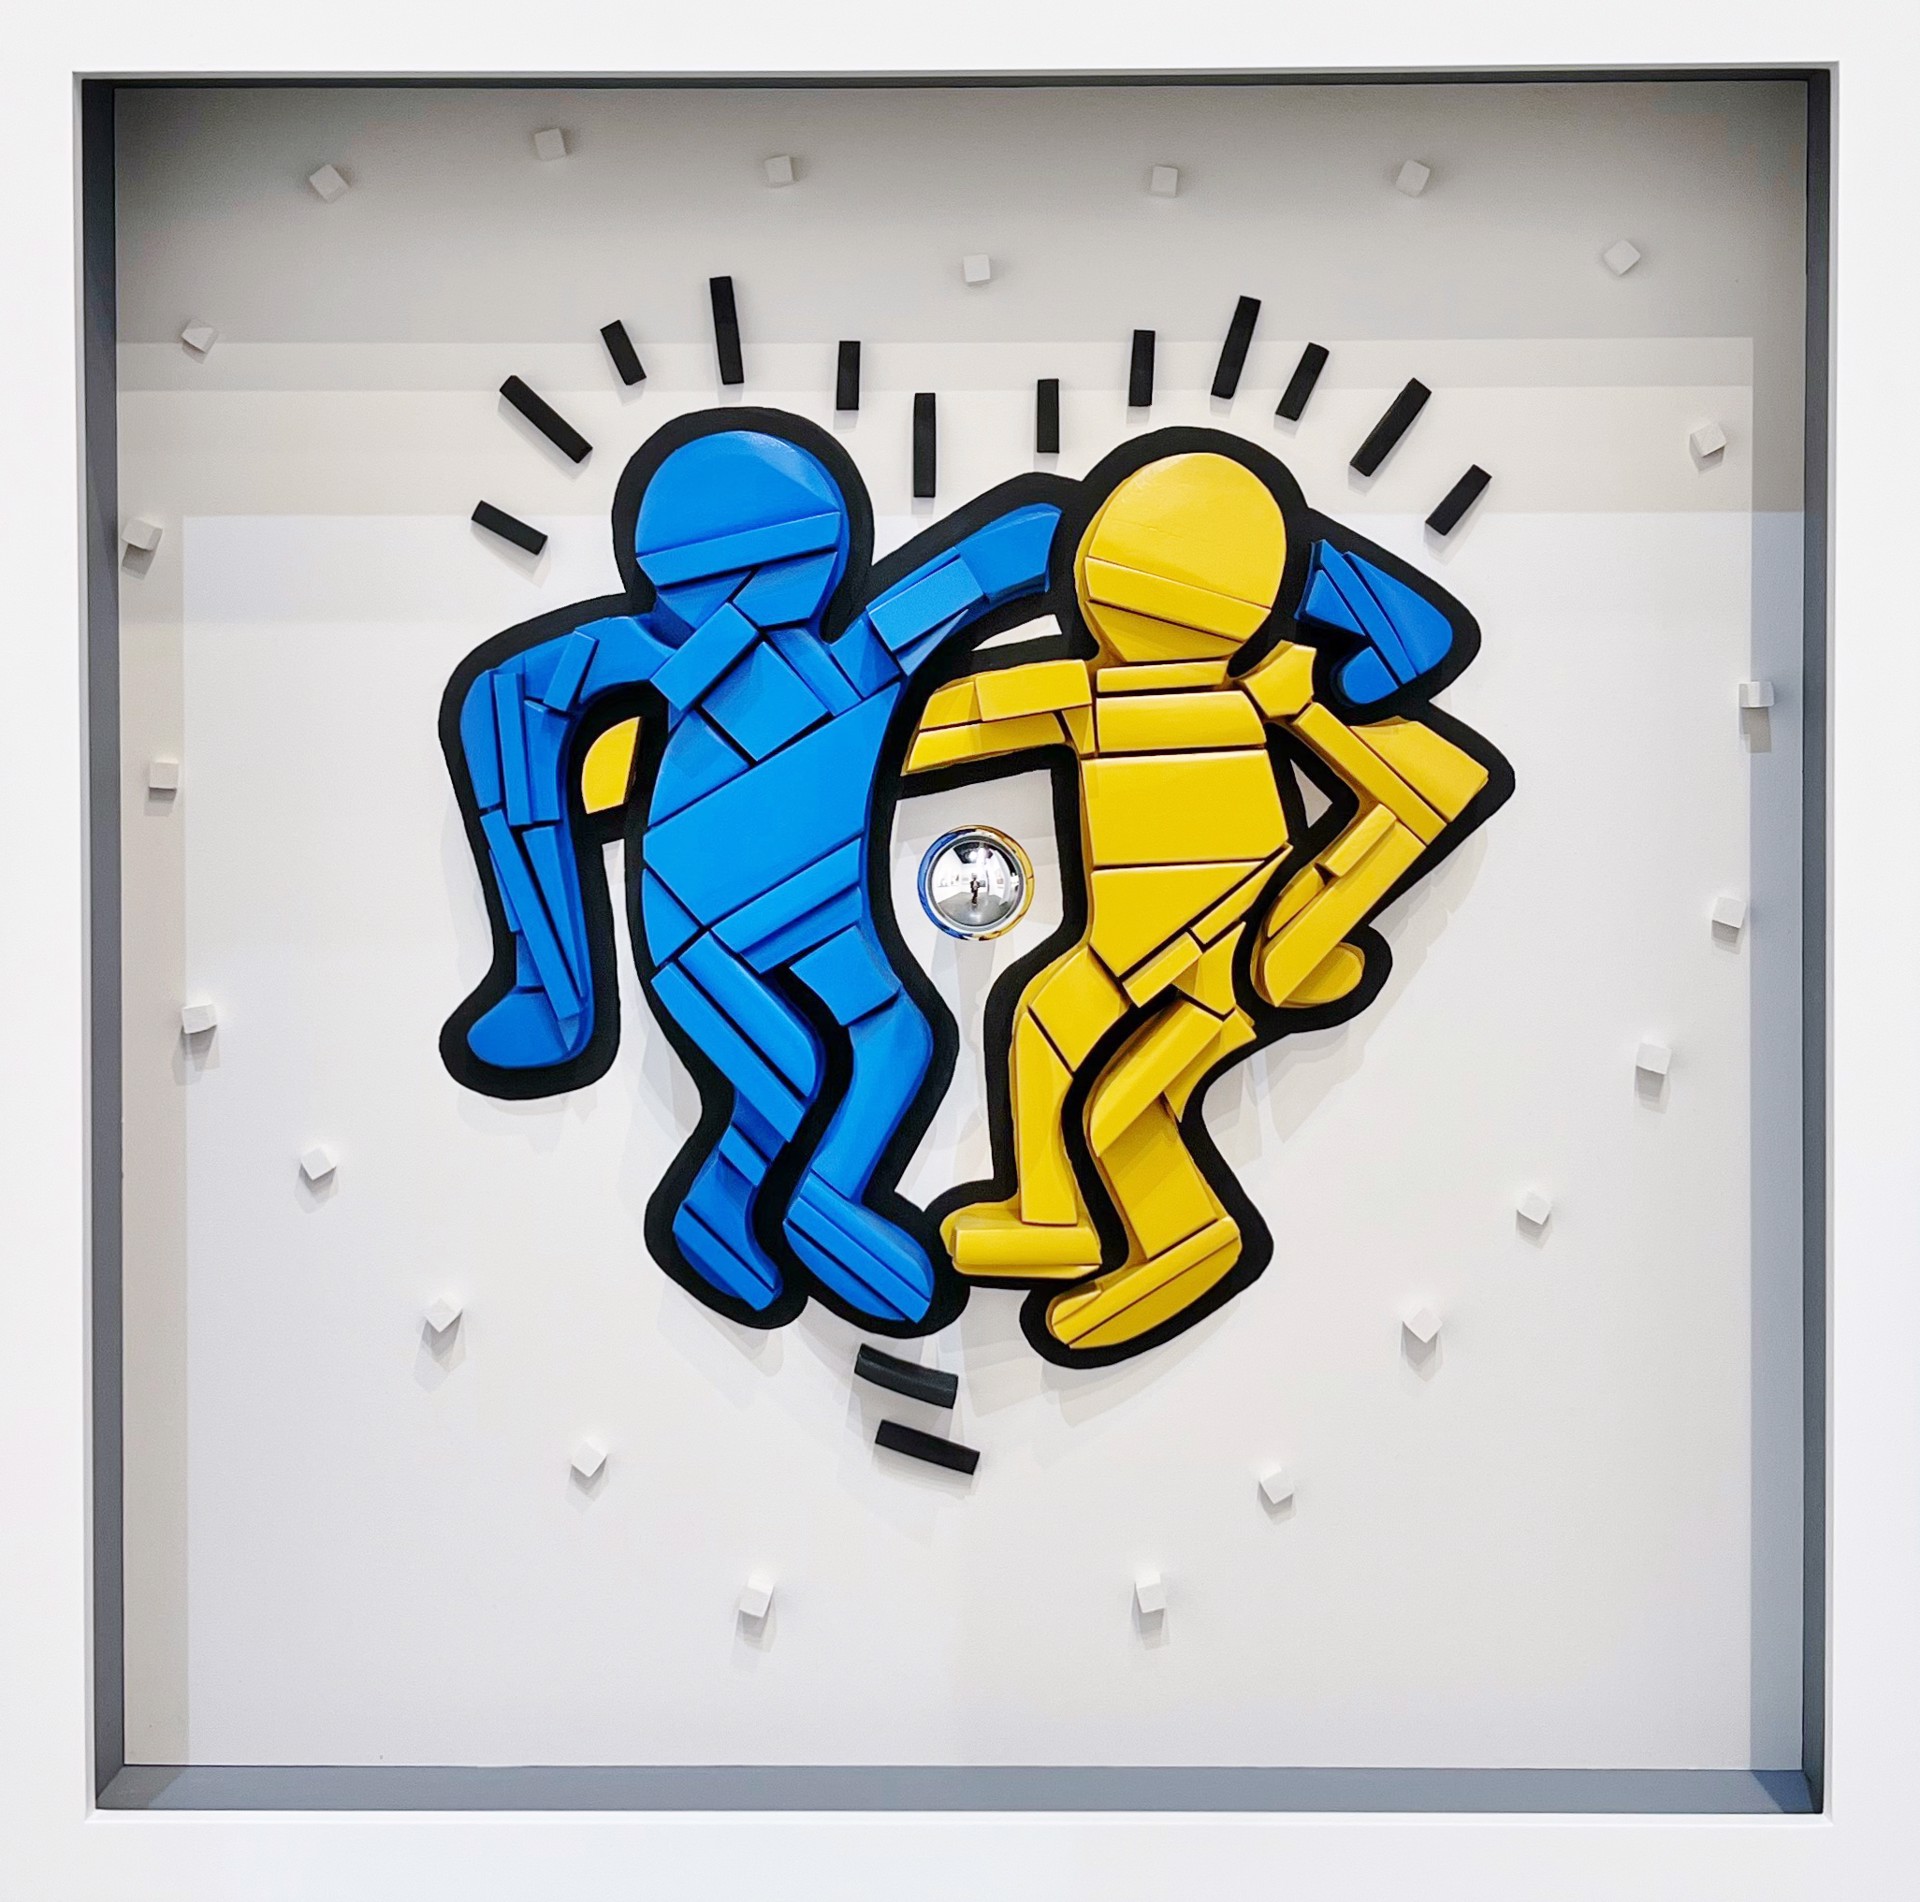 Buddy System IV (Homage to Haring) by J.P. Goncalves, Silhouette